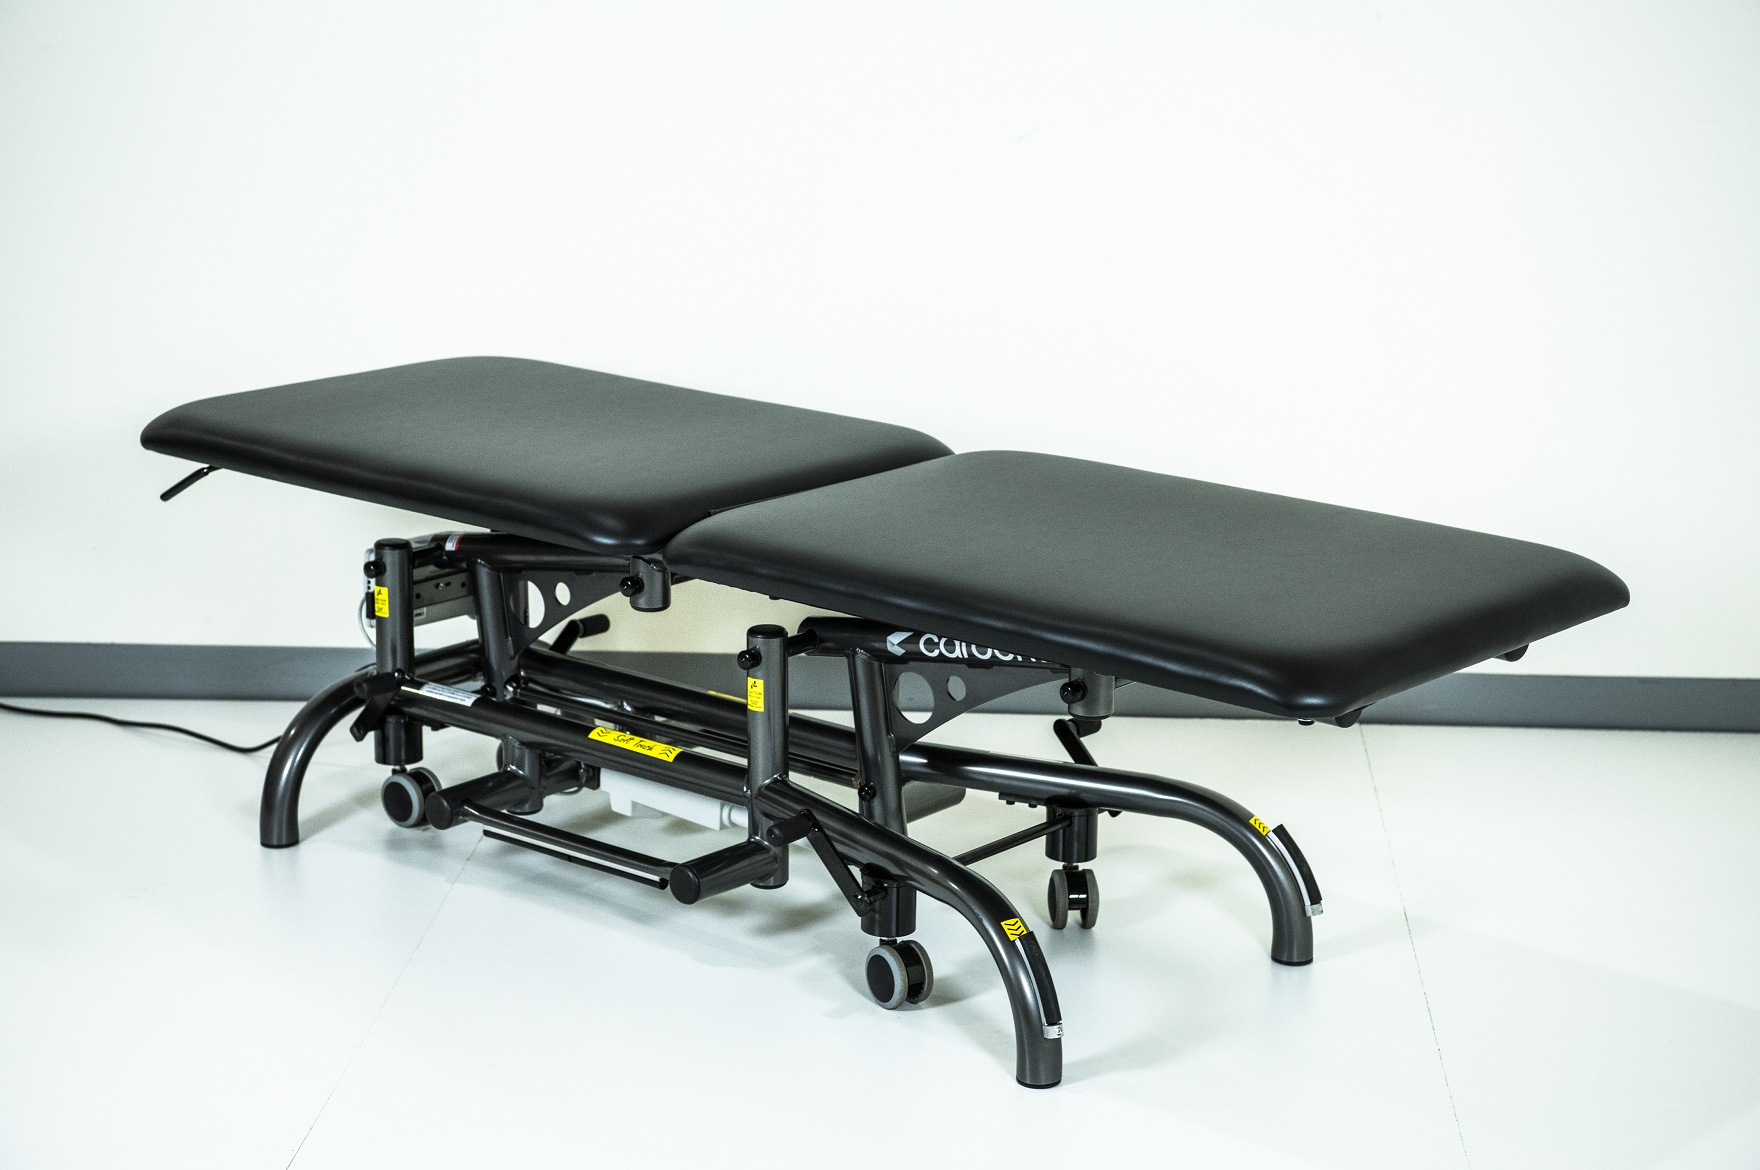 Cardon Treatment Table Ctt With Two Section Option Cardon Rehab Treatment Tables